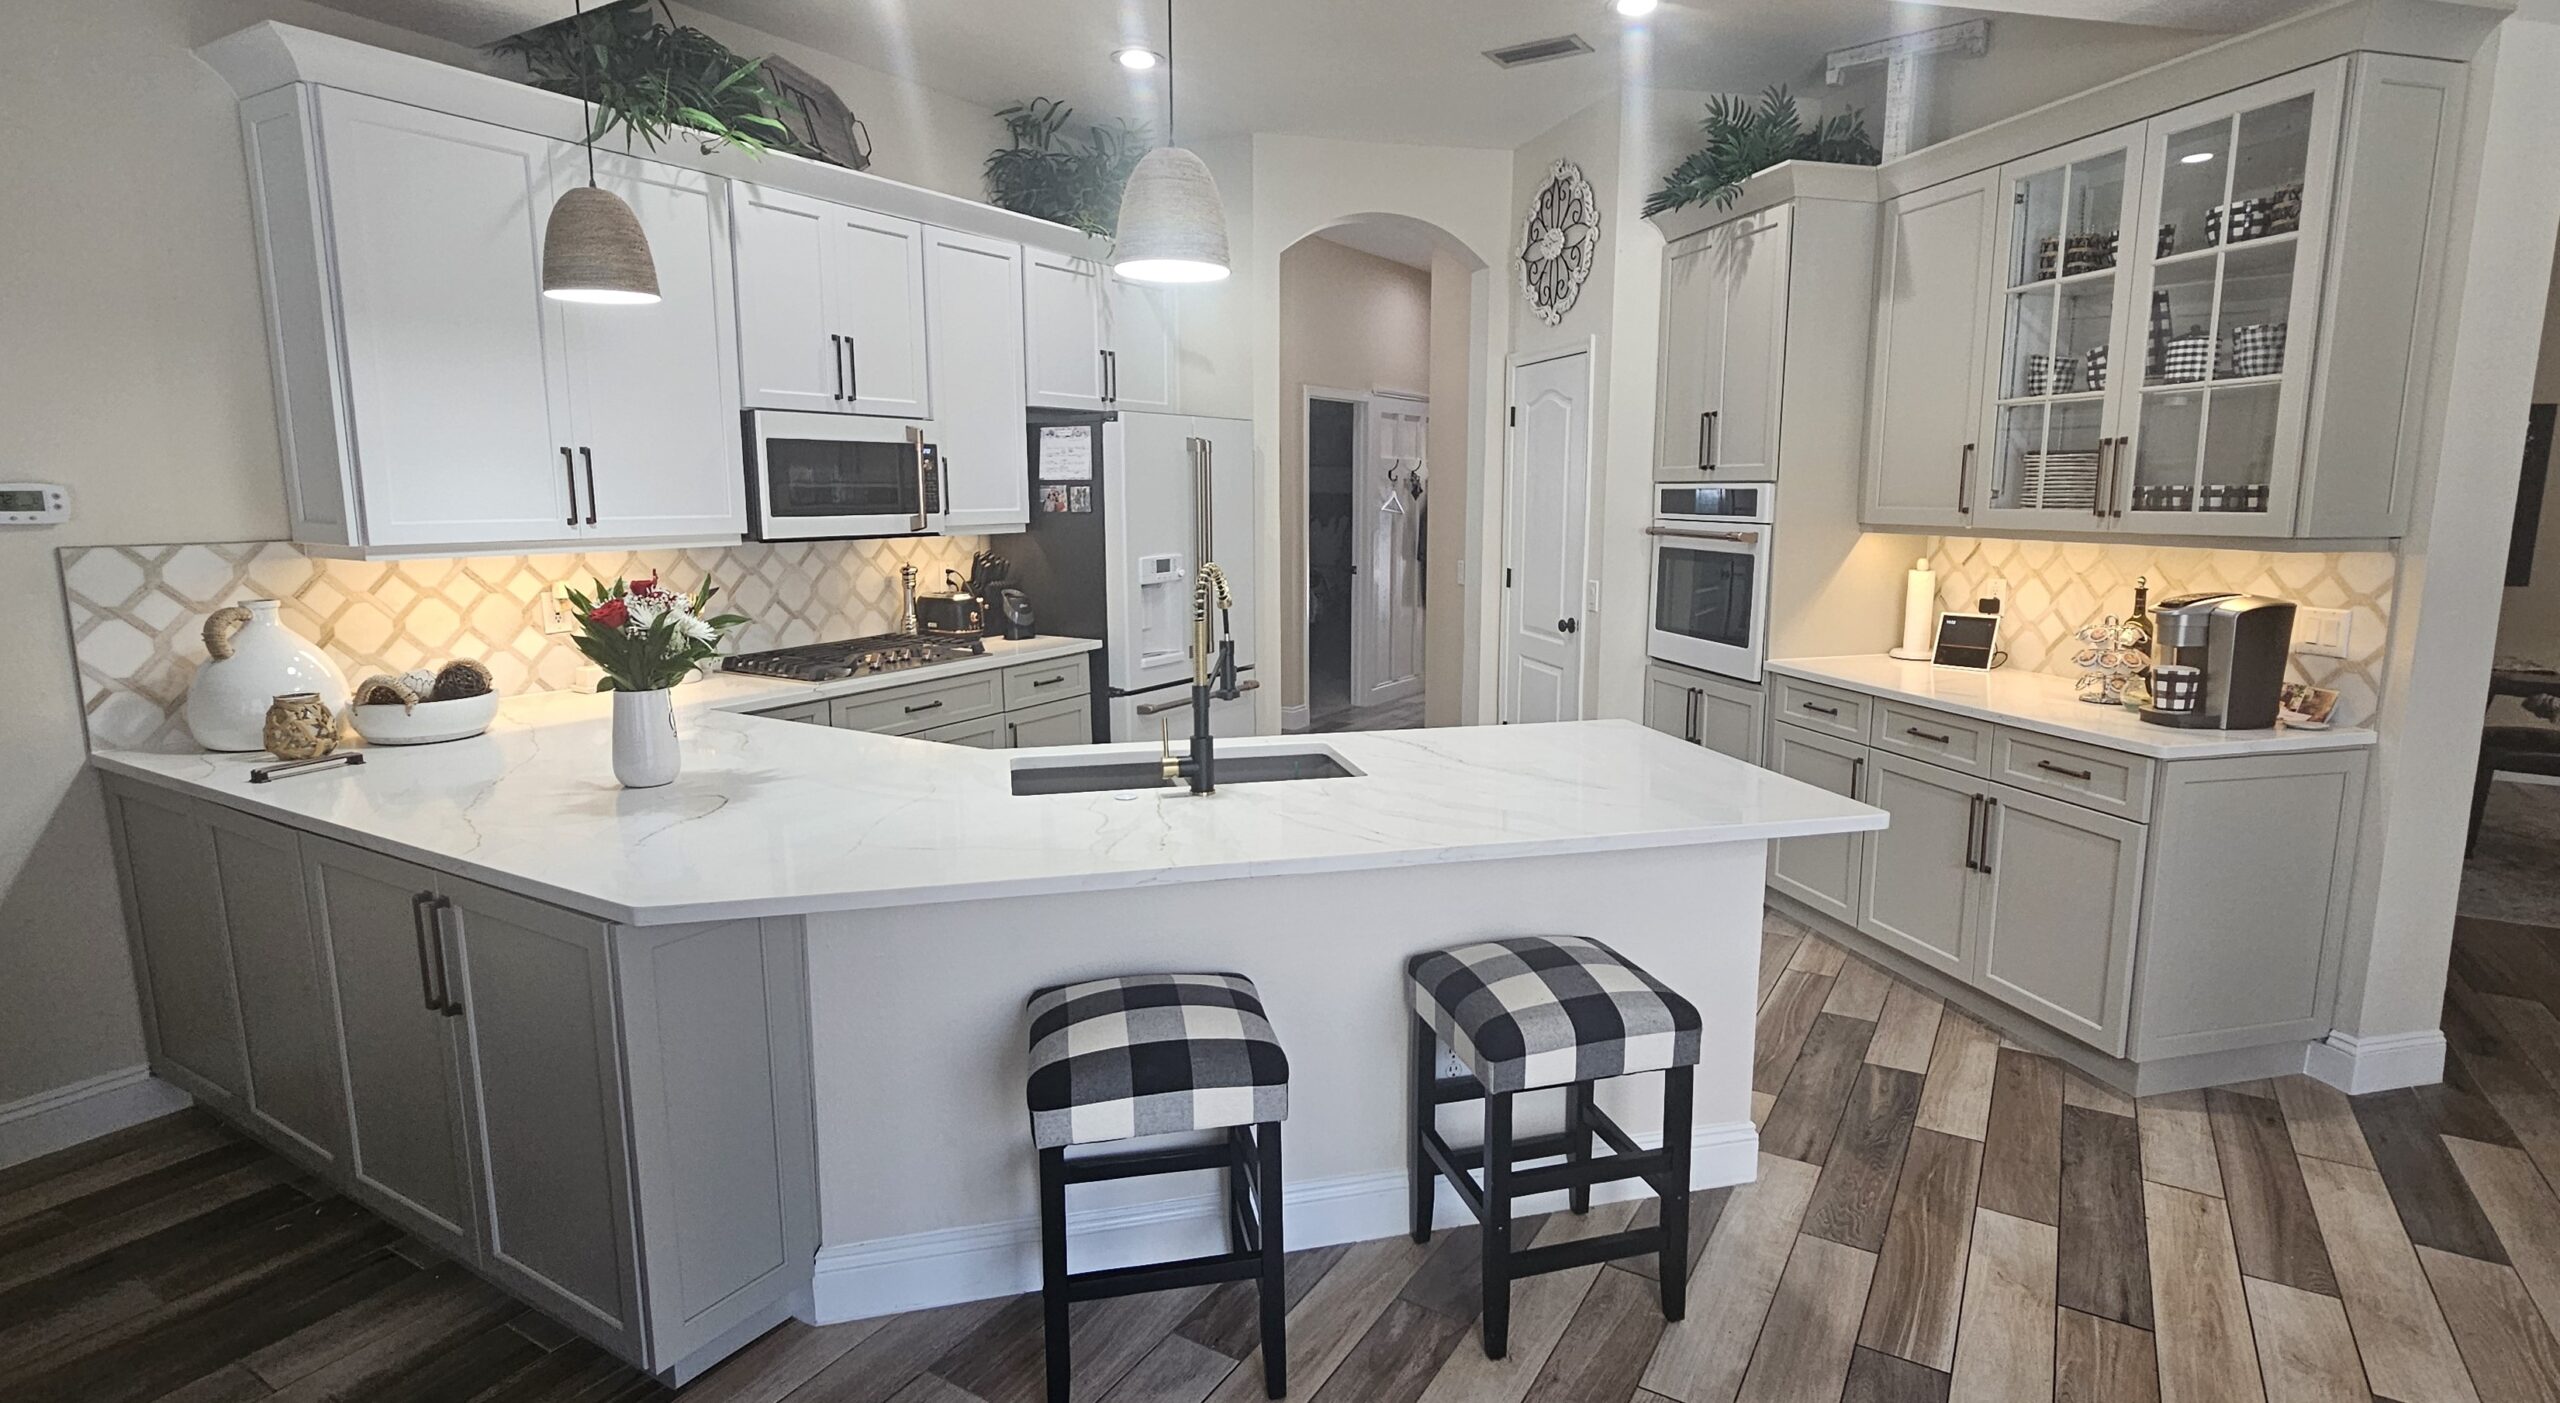 Modern appliances with a high-quality finish, granite worktops, and sleek white cabinet doors in Northdale 